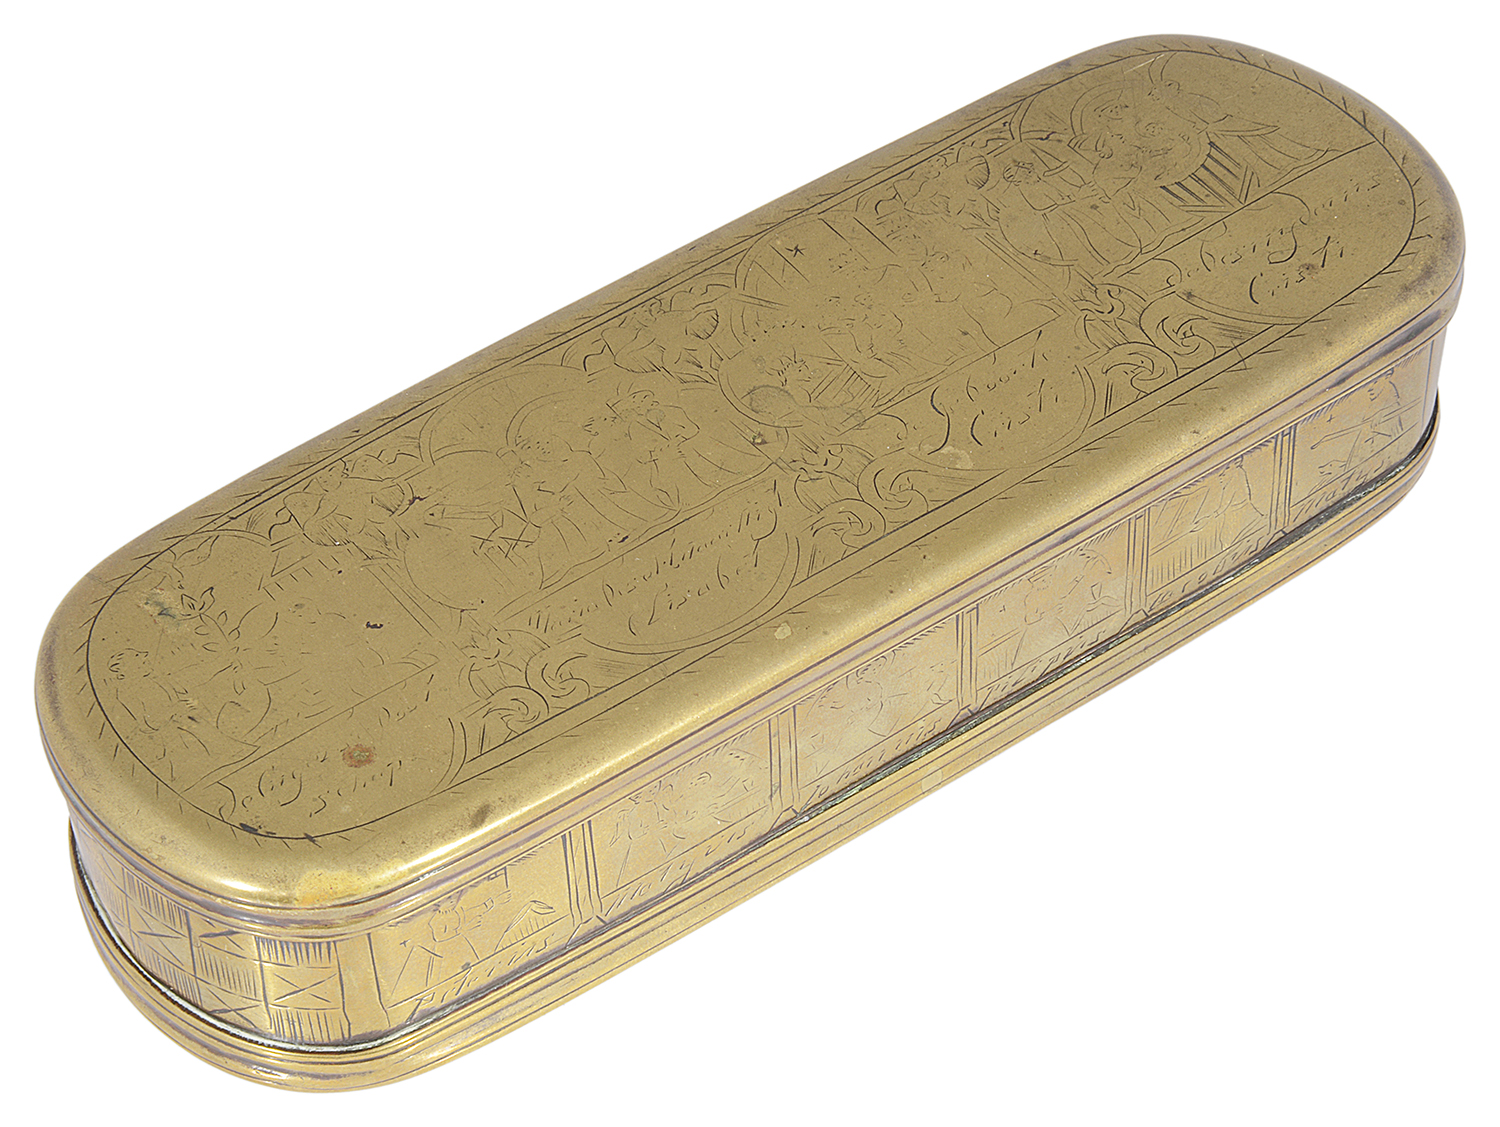 An 18th century brass tobacco box - Image 2 of 3